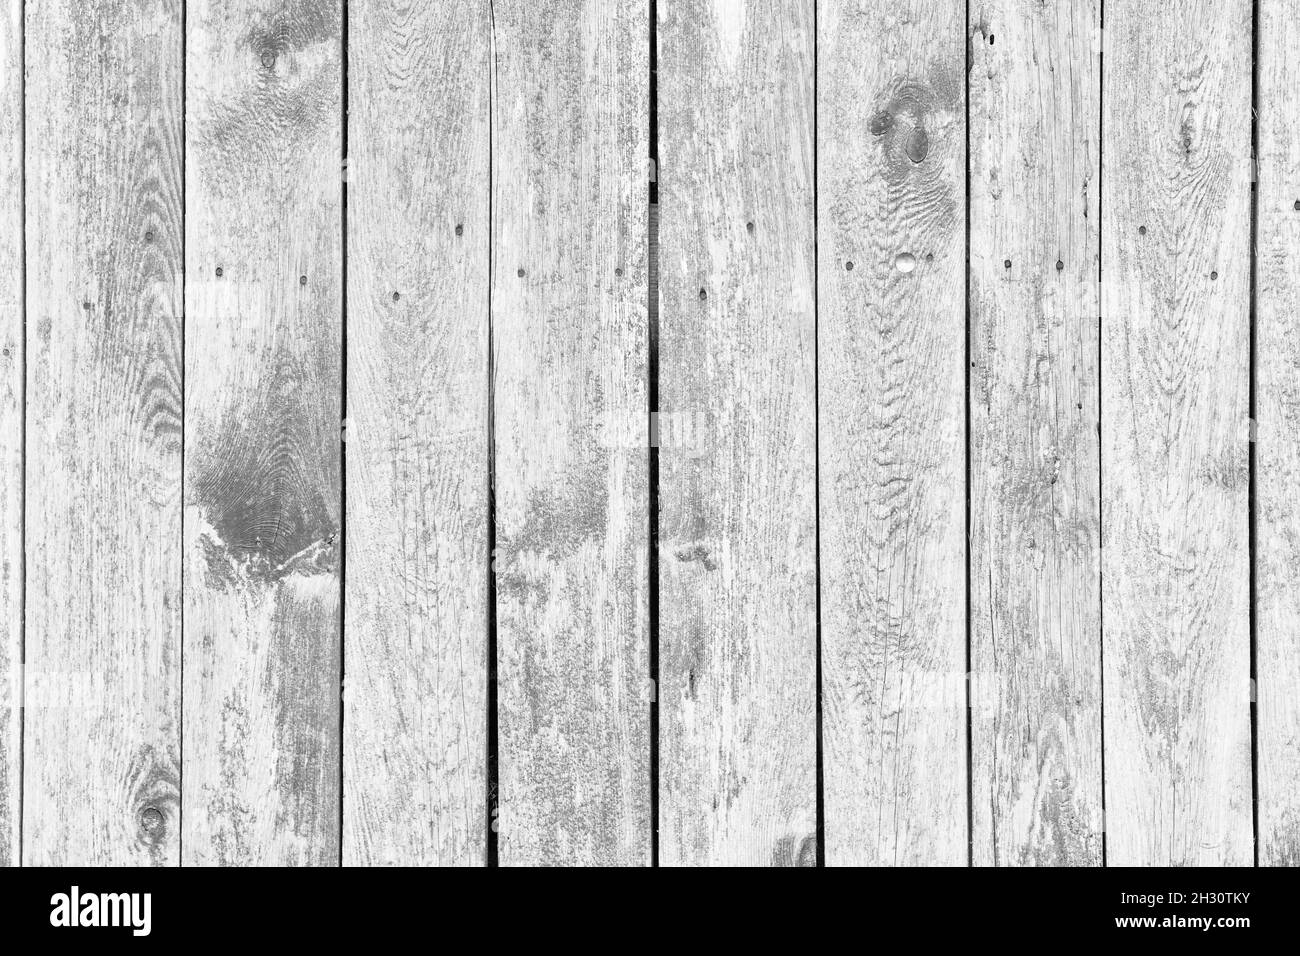 Wooden background with gray colored vertical planks Stock Photo